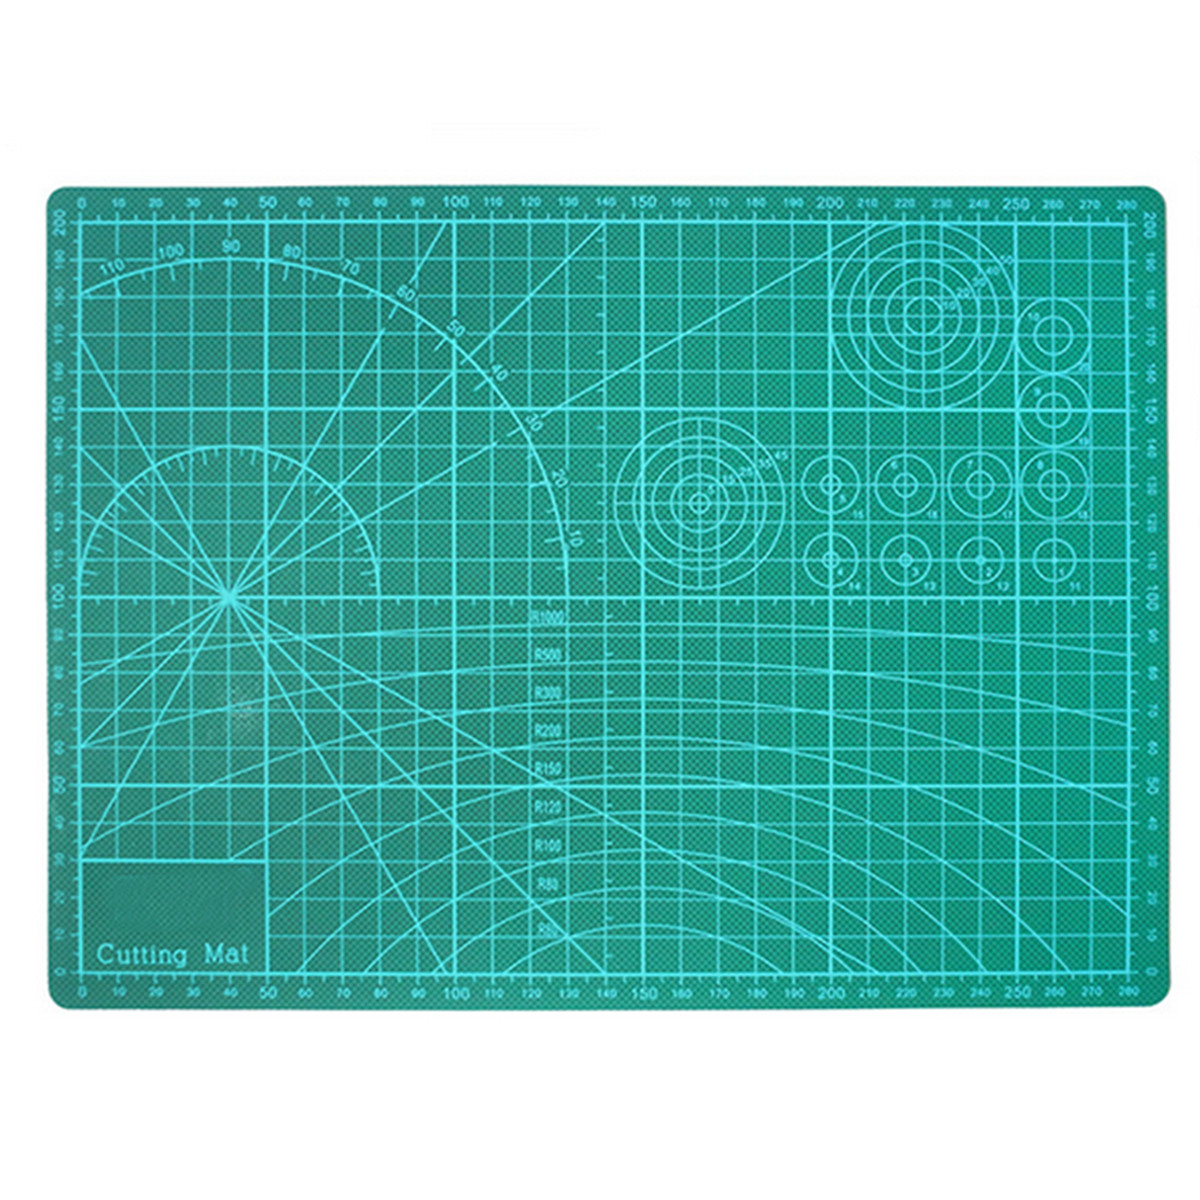 Double-Sided-Green-Cutting-Mat-Board-A4-Size-Pad-Model-Healing-Design-Craft-Tool-1202777-3